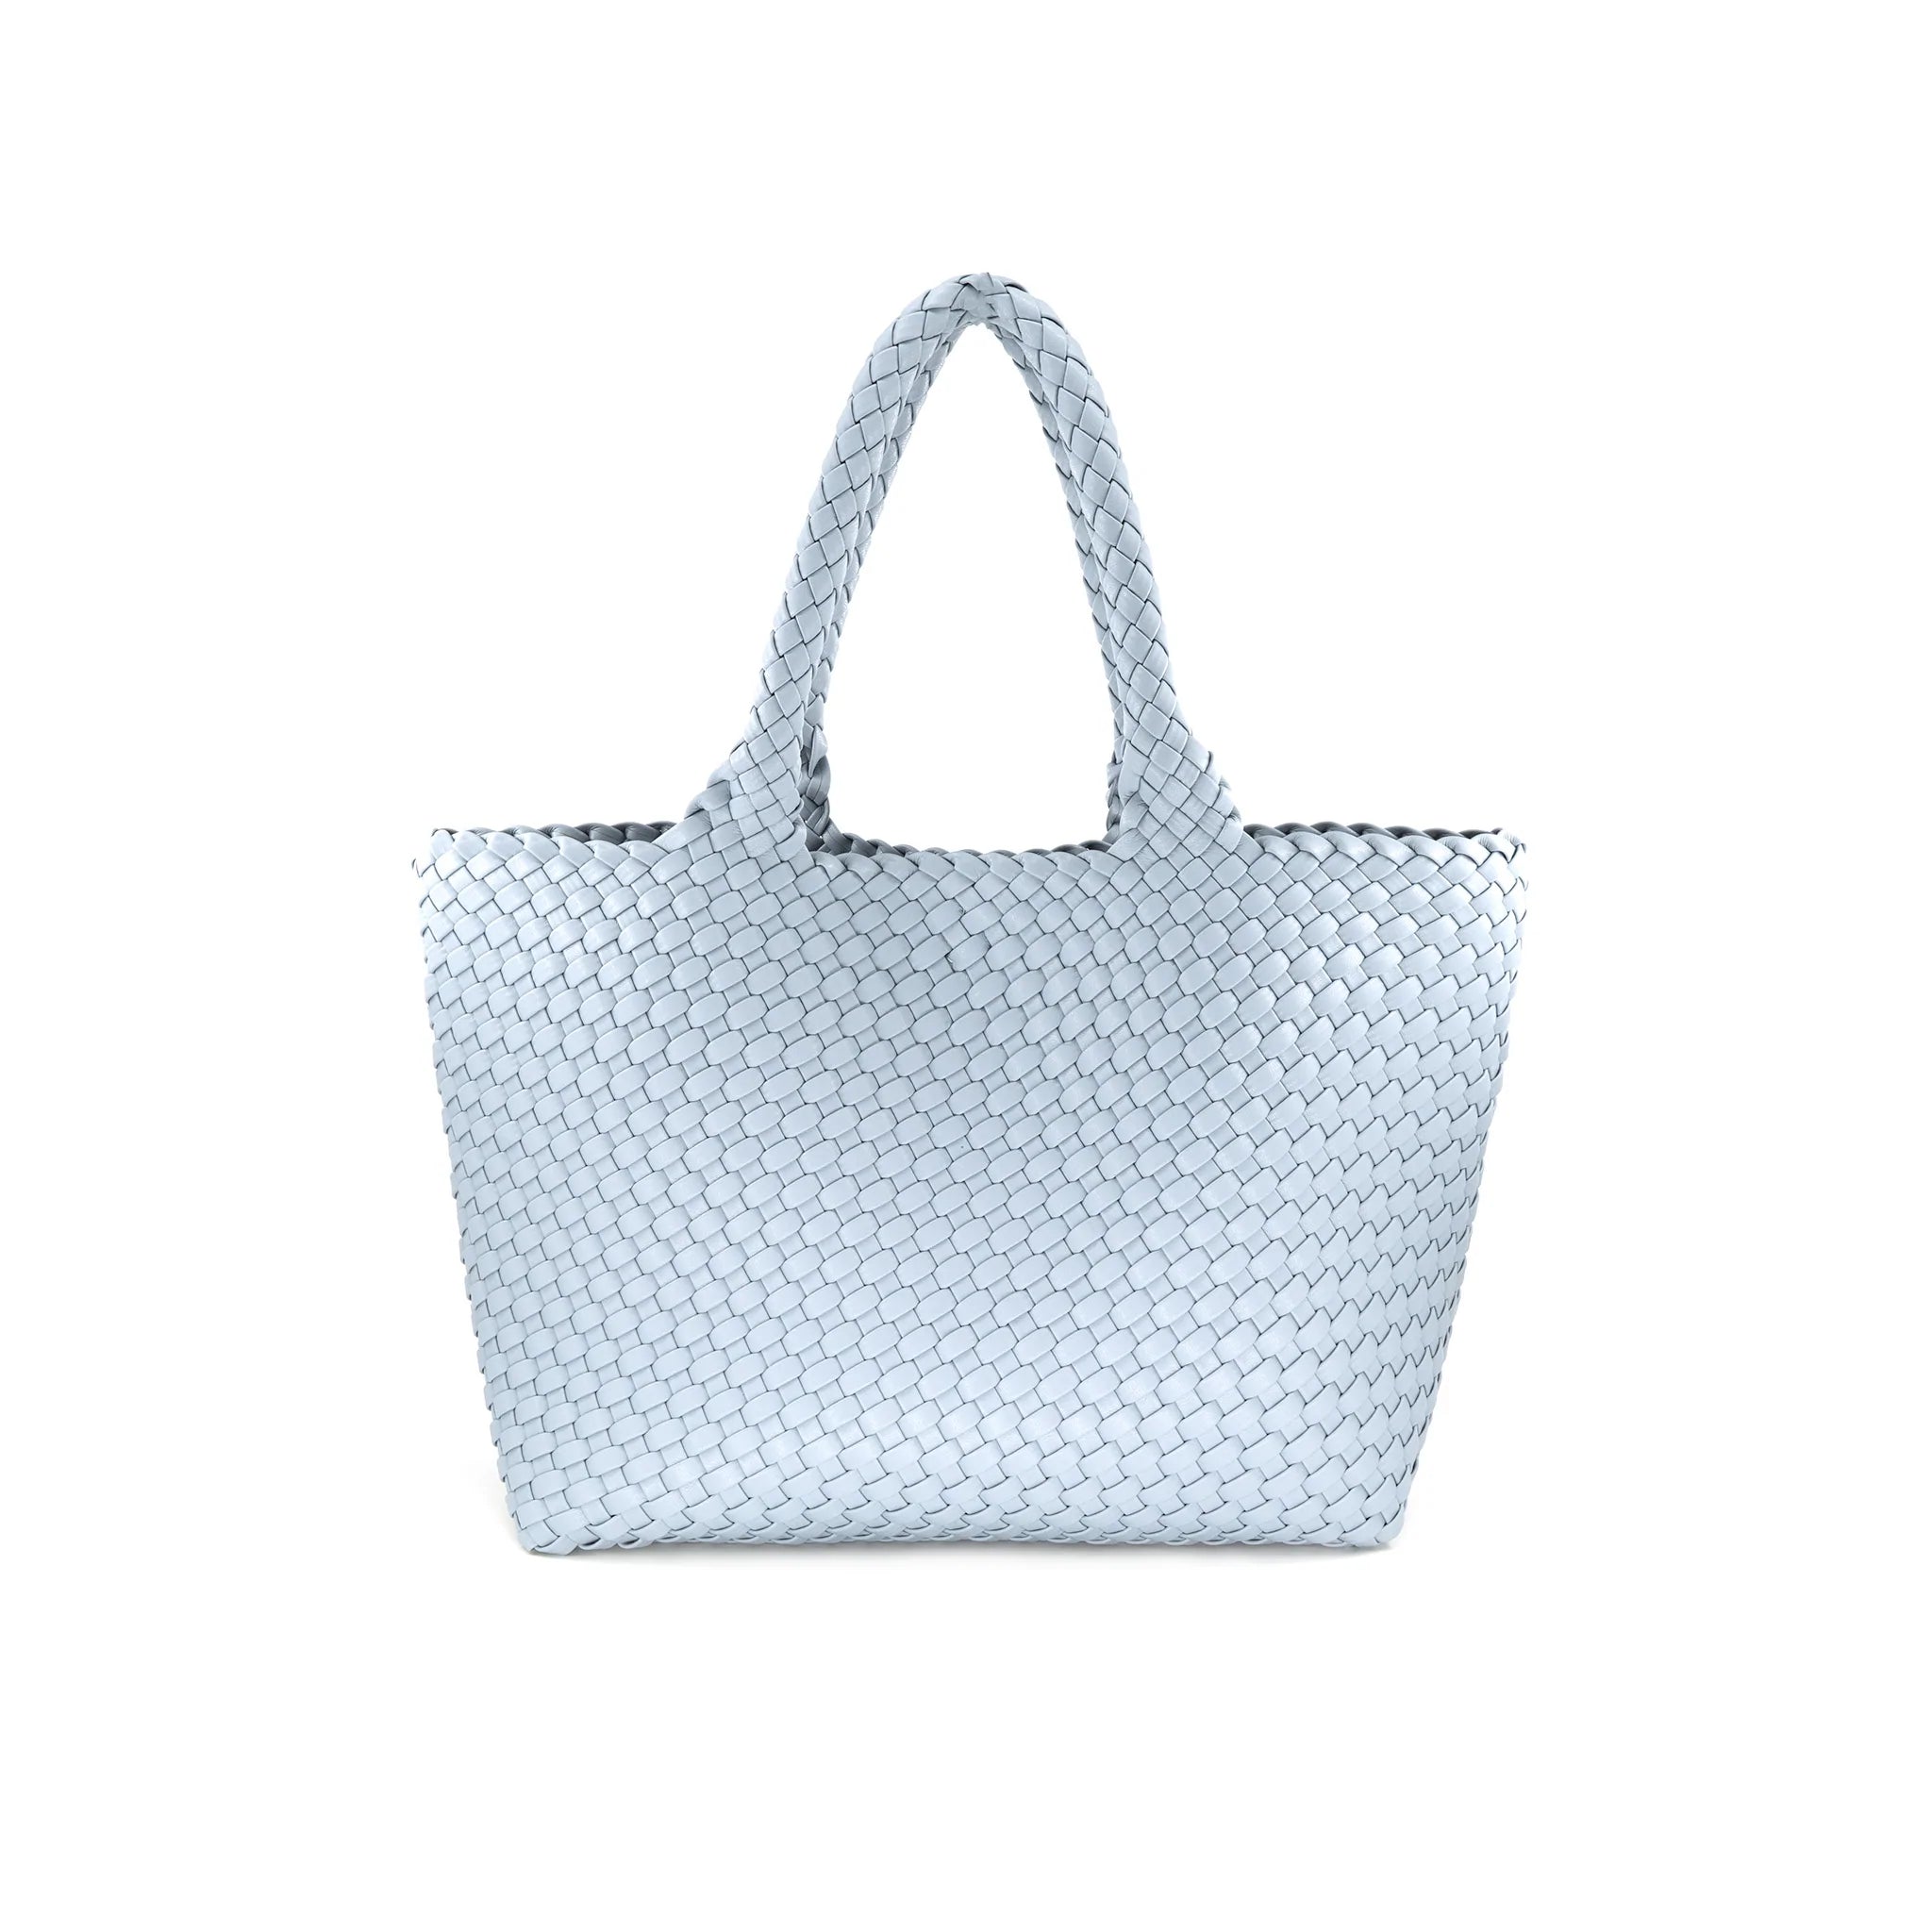 Woven Tote in Sky Blue